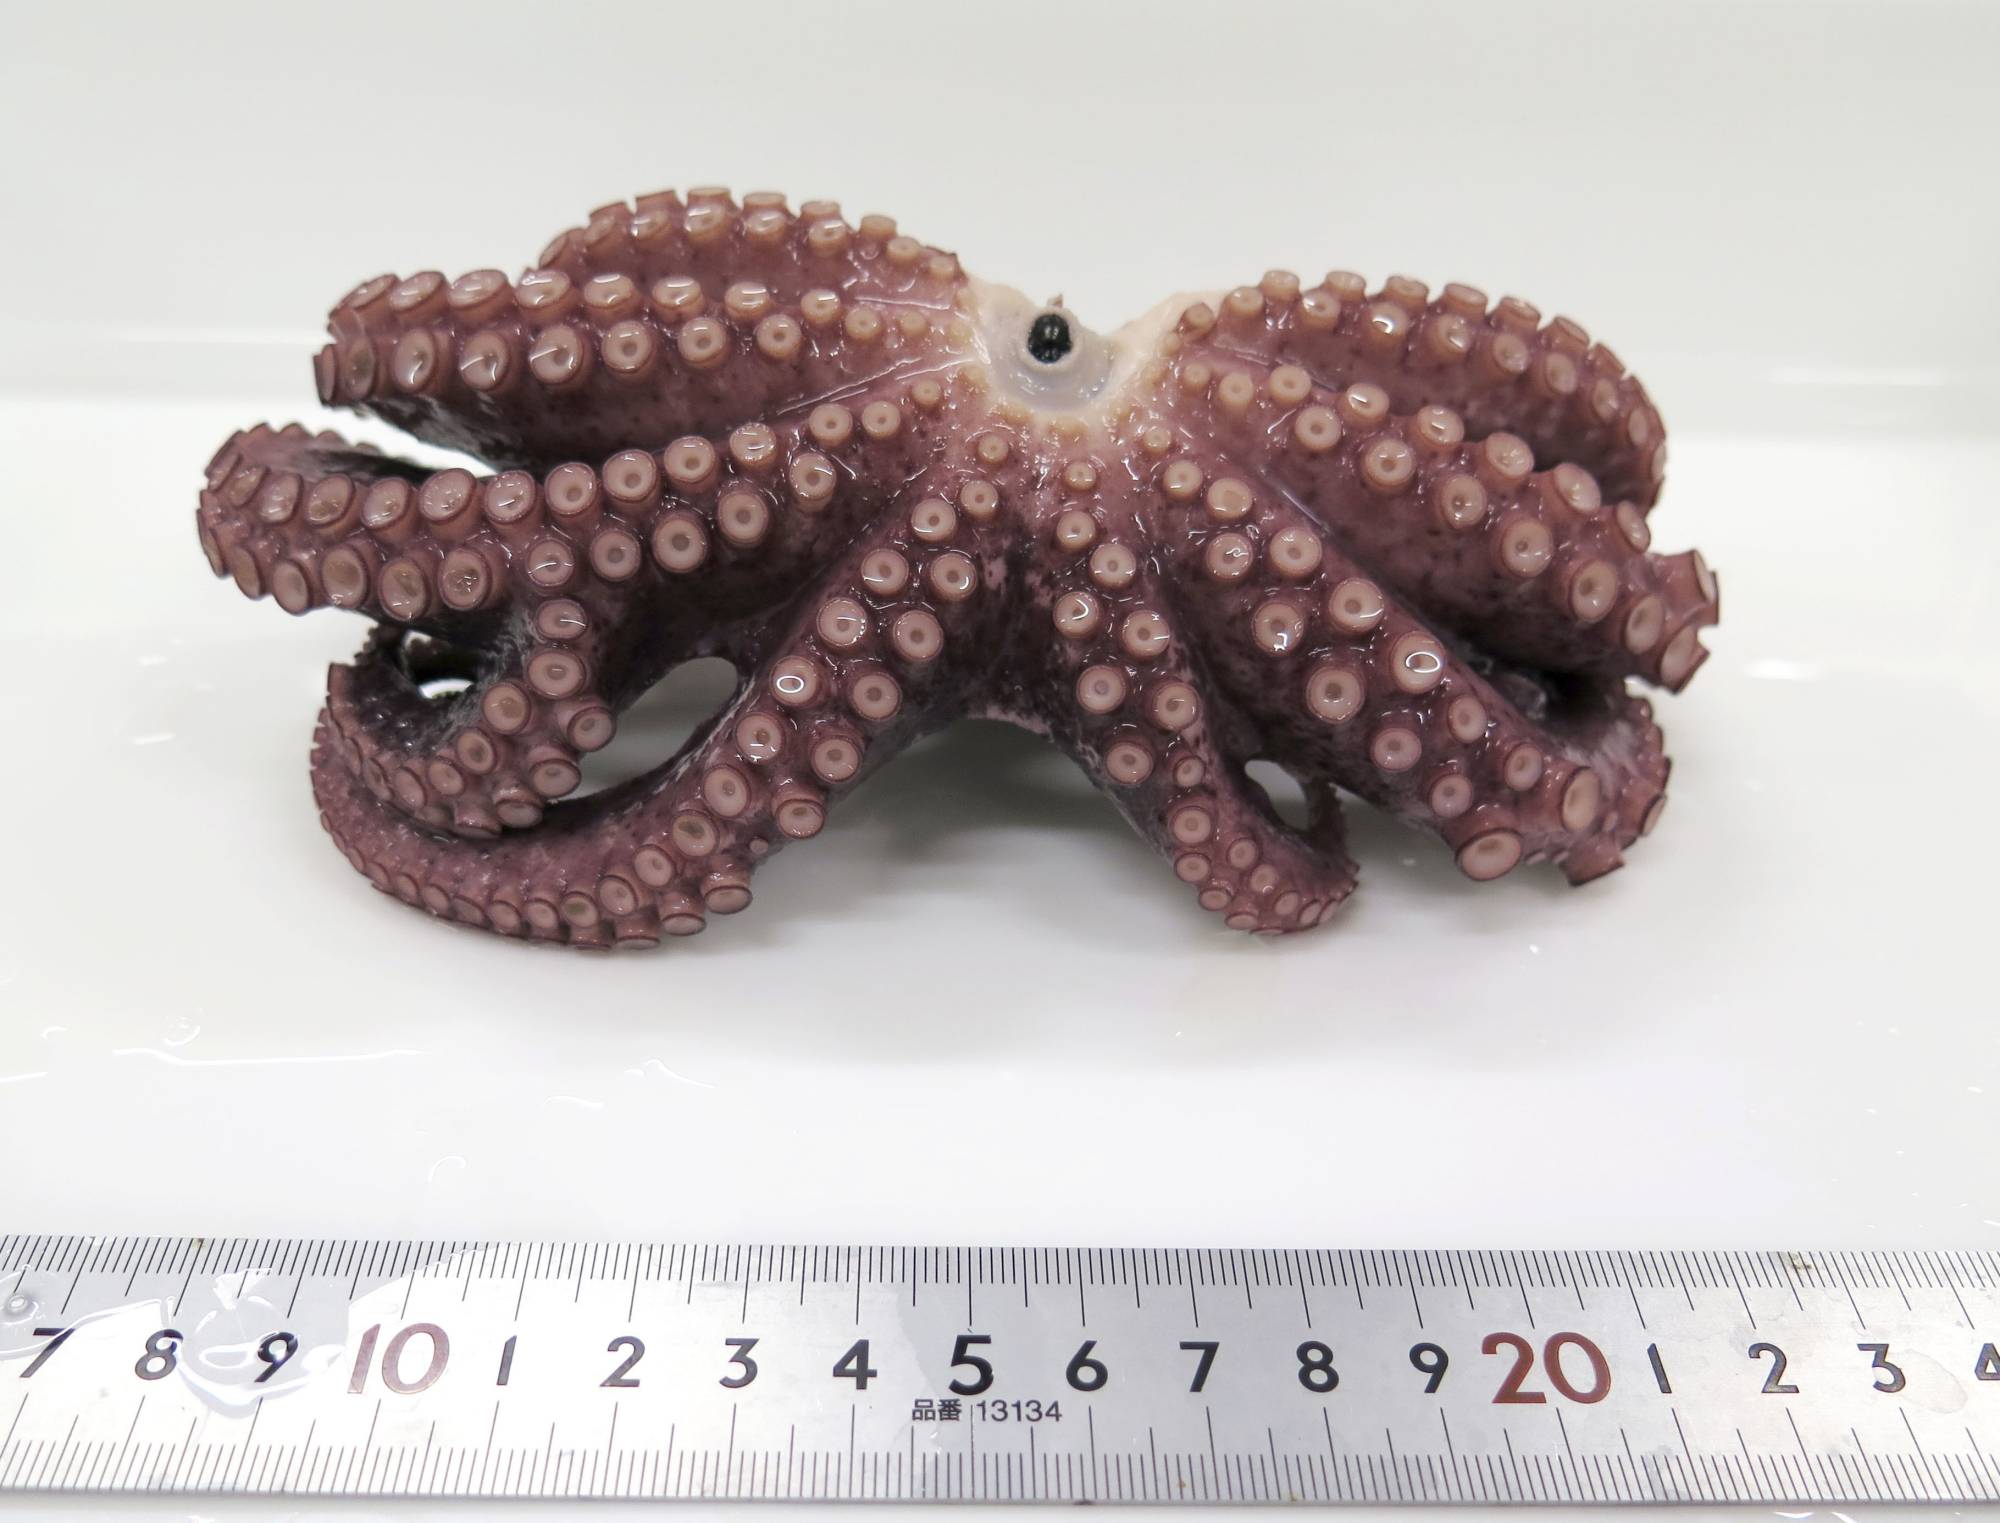 The diversity of nature': Rare 9-tentacled octopus found in